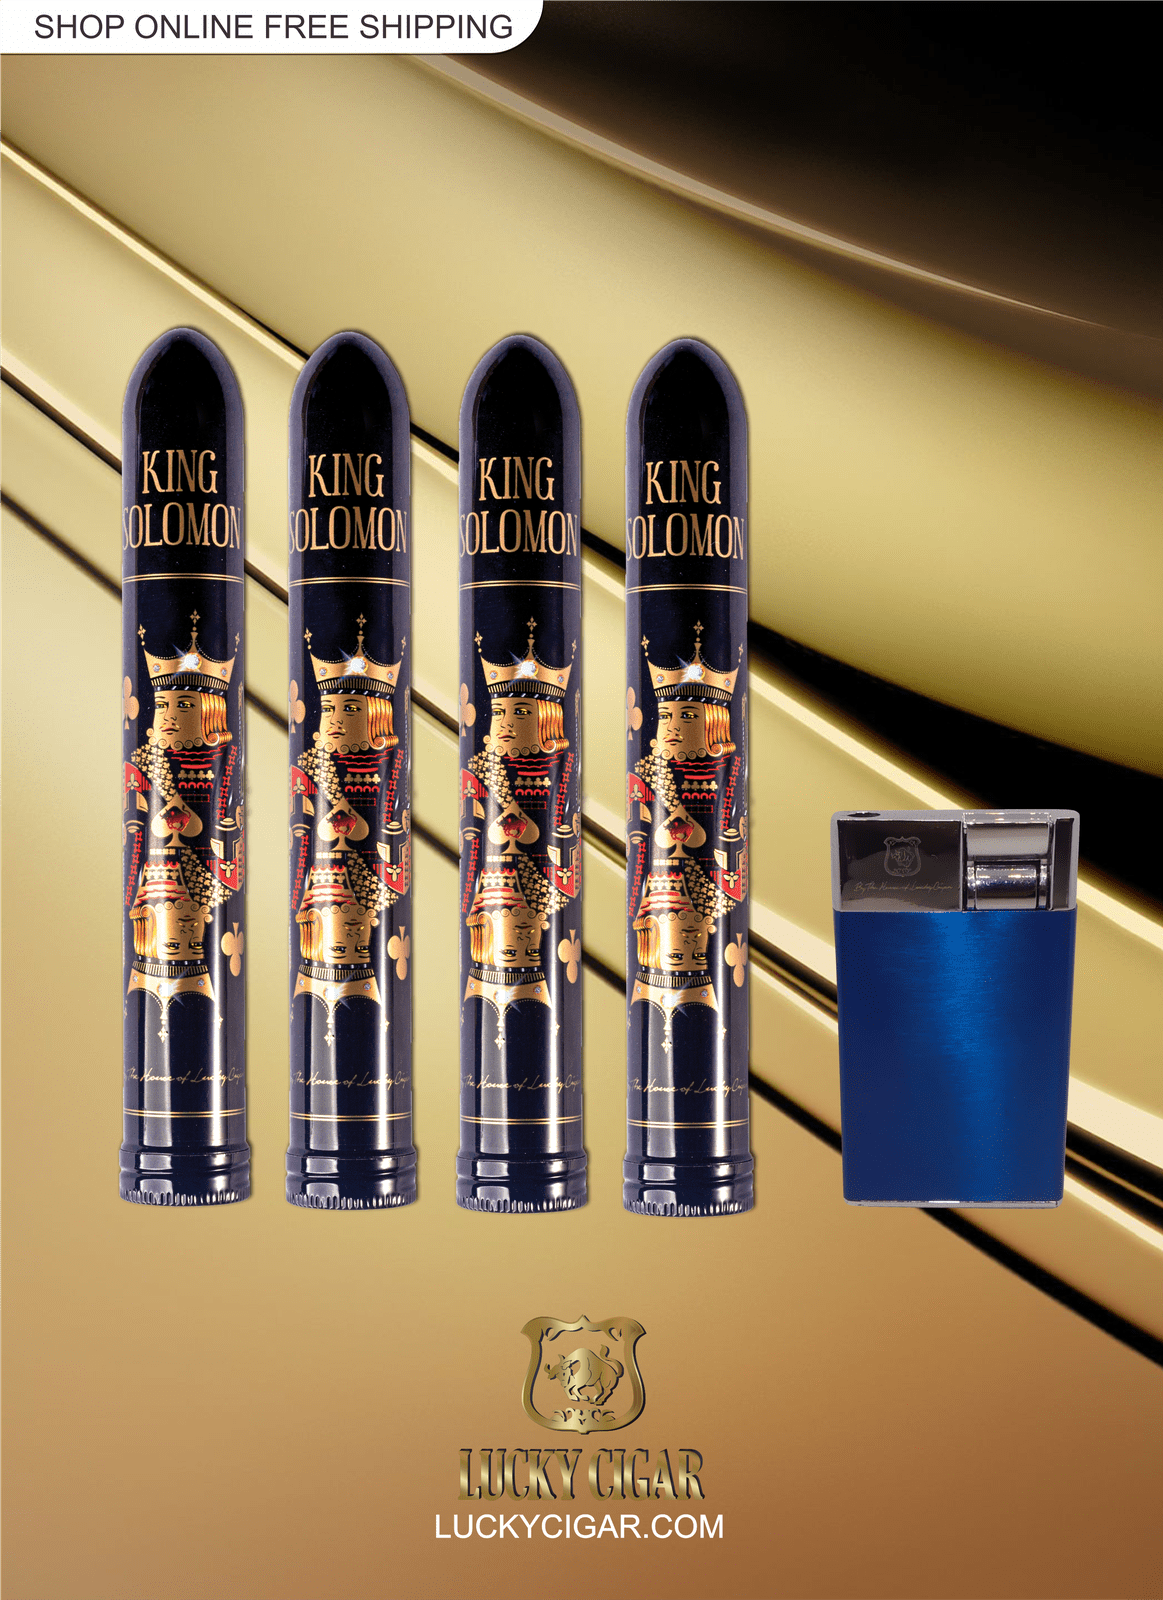 From The King Solomon Series: 4 Solomon 7x60 Cigars with Lighter Blue